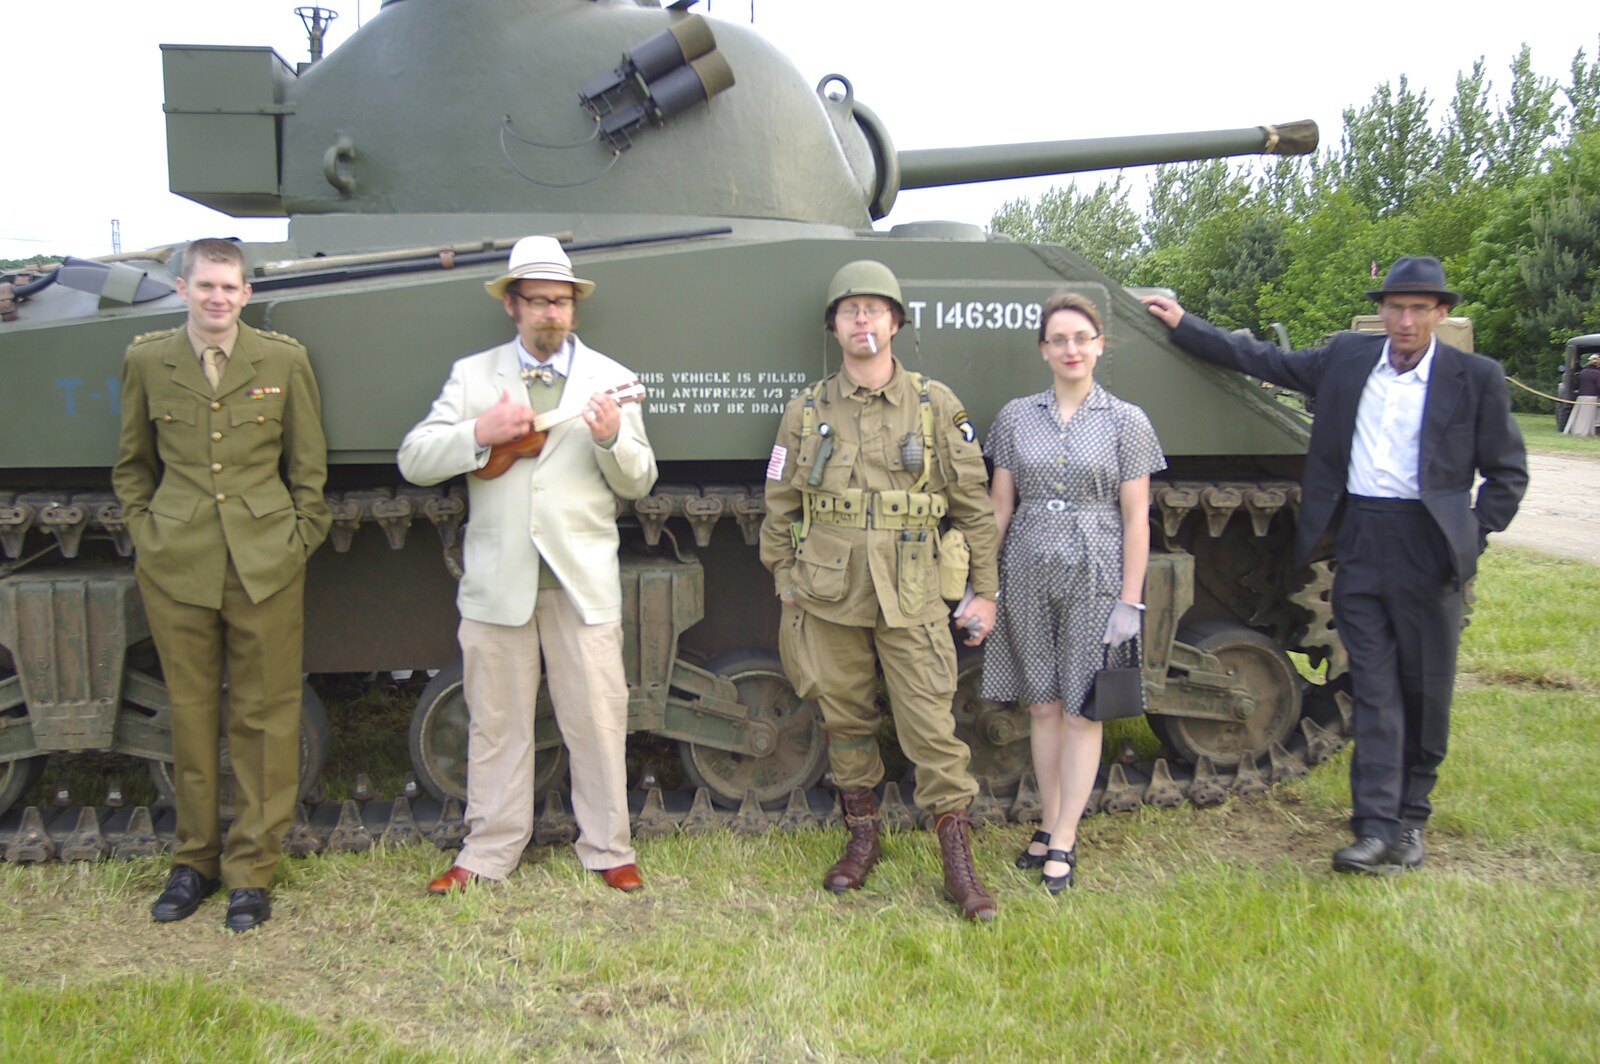 The gang in front of a tank from The Debach Airfield 1940s Dance, Debach, Suffolk - 6th June 2009